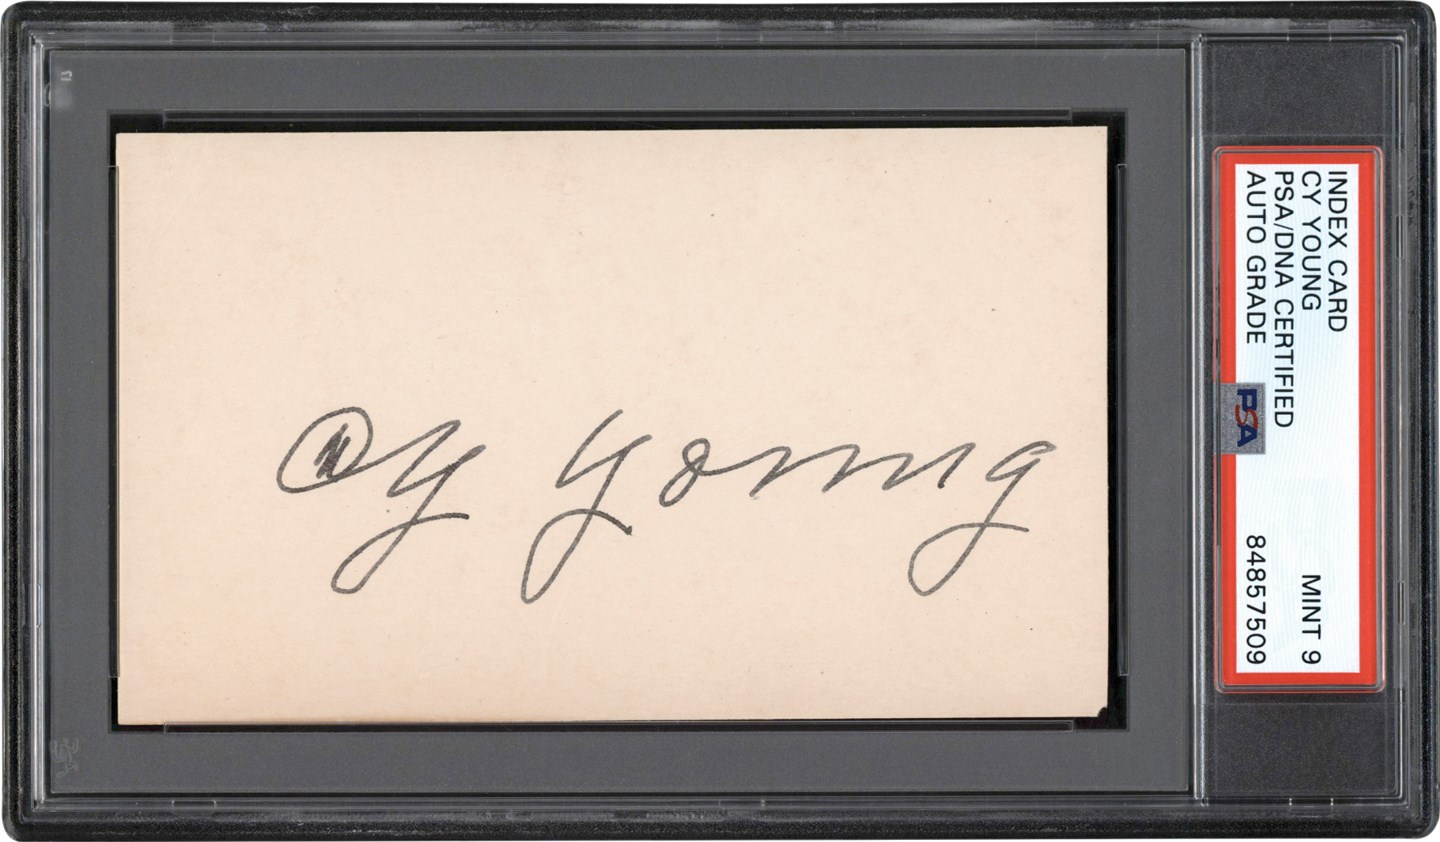 Cy Young Signed Index Card (PSA MINT 9 Auto)